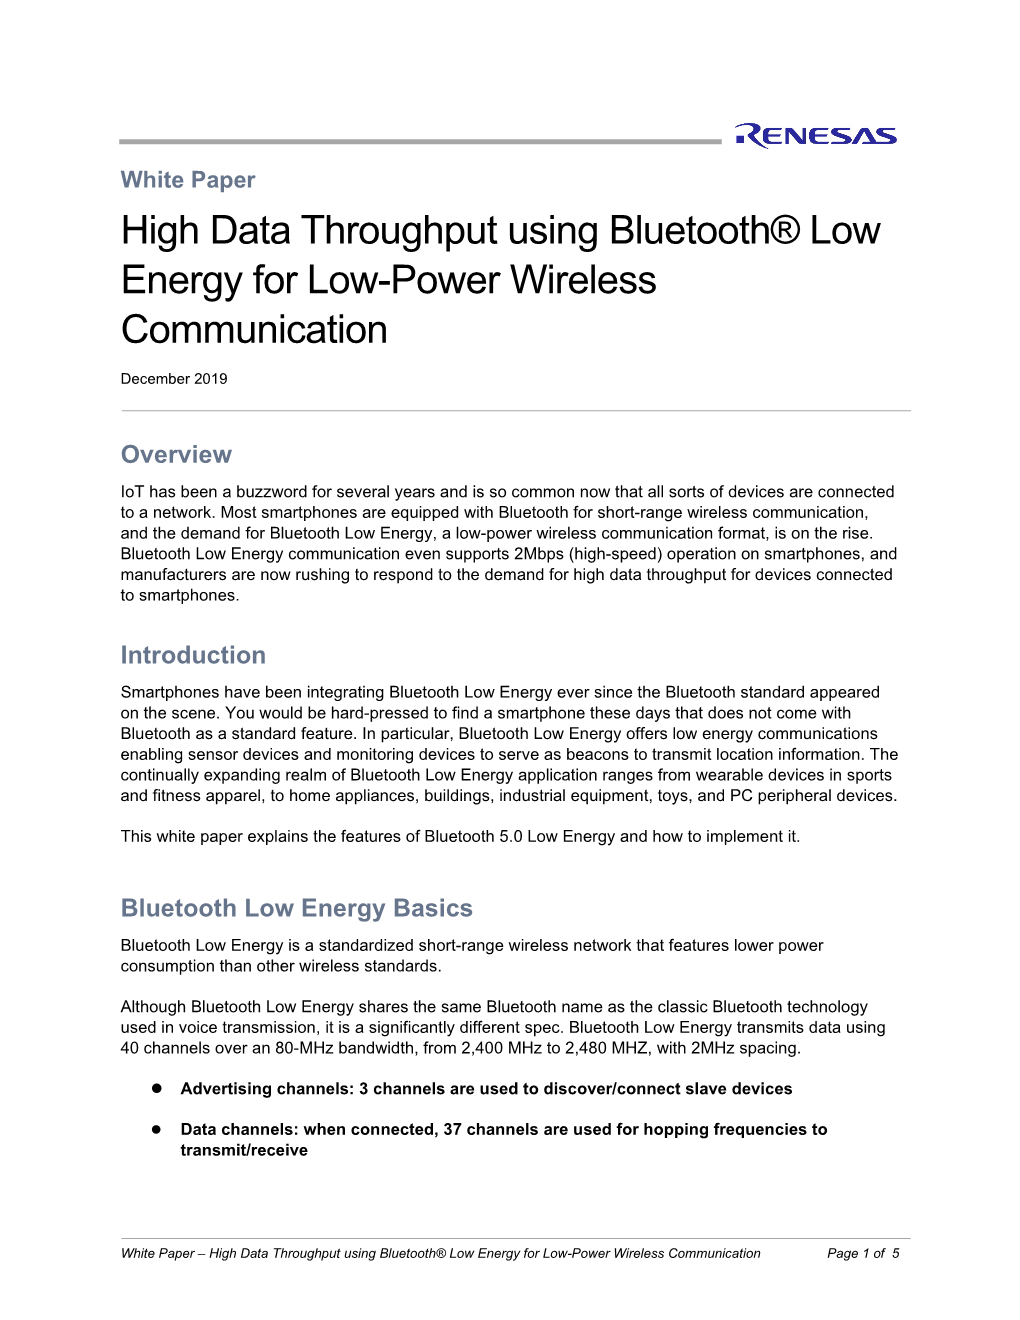 High Data Throughput Using Bluetooth® Low Energy for Low-Power Wireless Communication